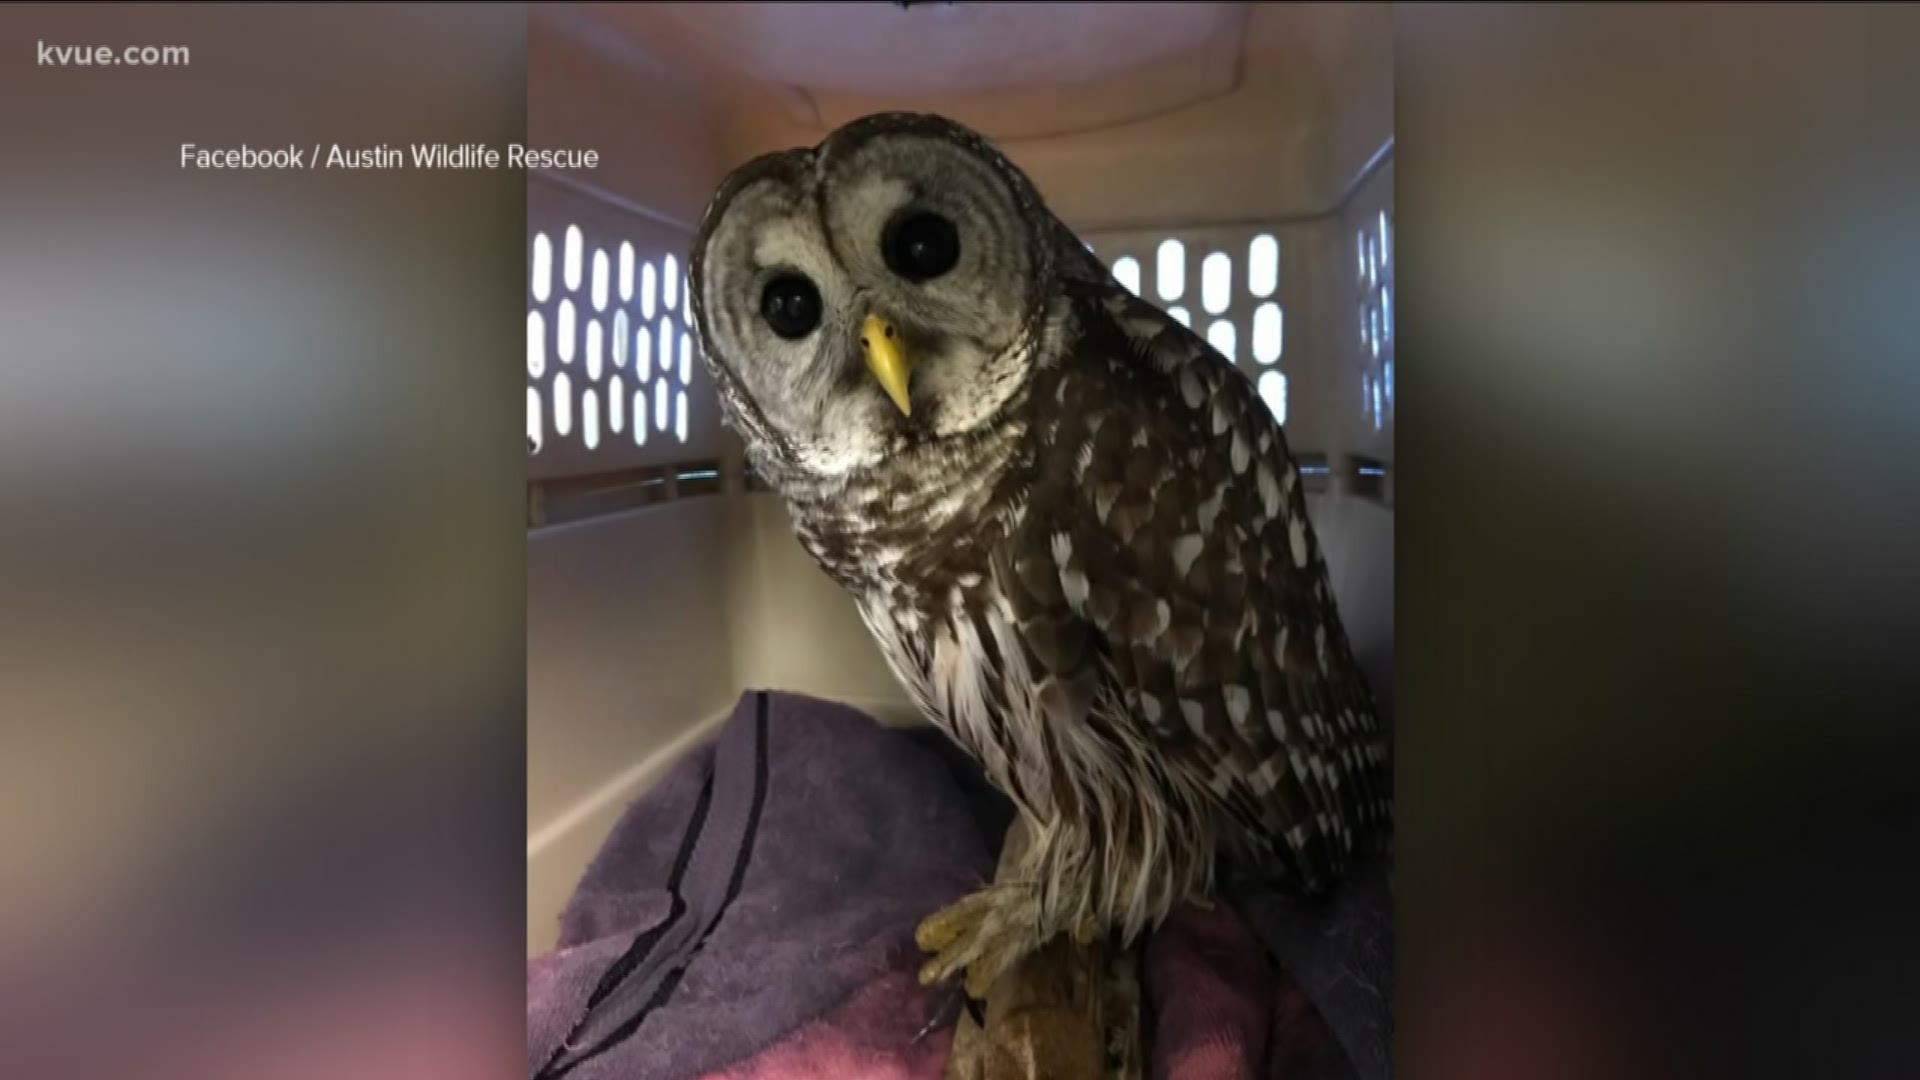 Austin Wildlife Rescue has a message about pest control after saving an owl stuck in a glue trap.